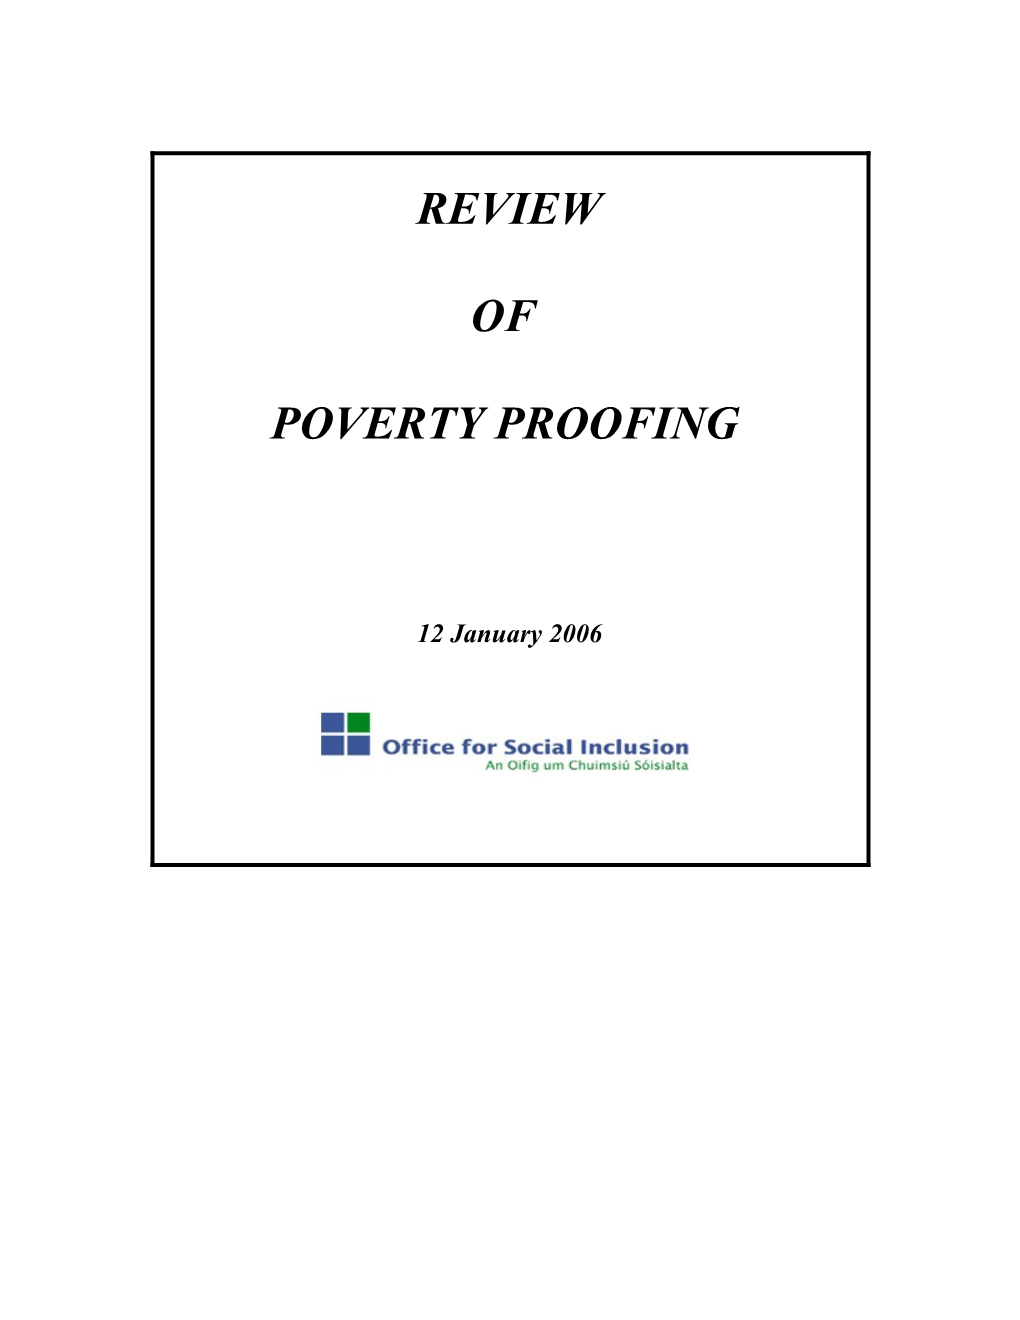 Poverty Proofing